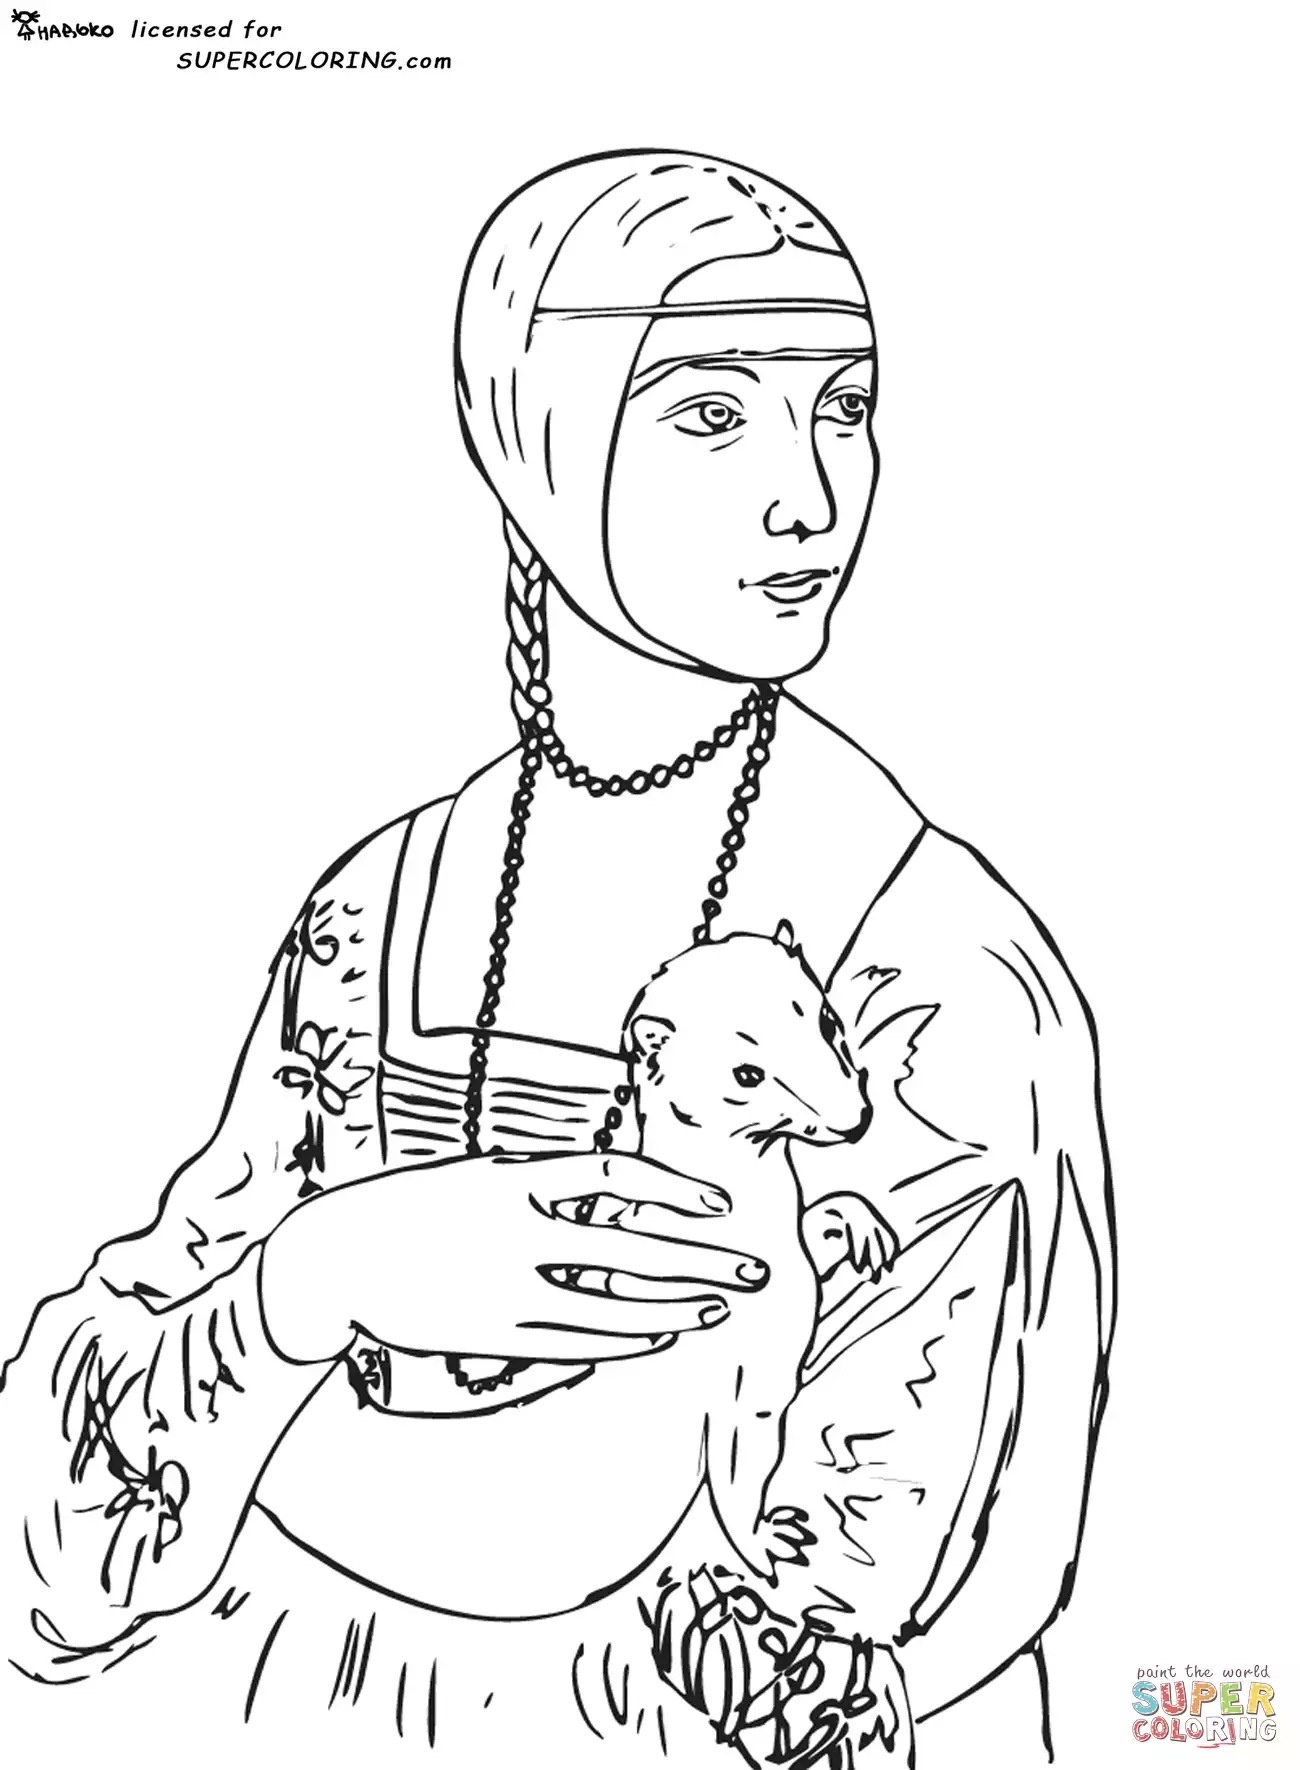 Coloring page created from Leonardo da Vinci's painting 'Lady with an ermine' (1489-1490)